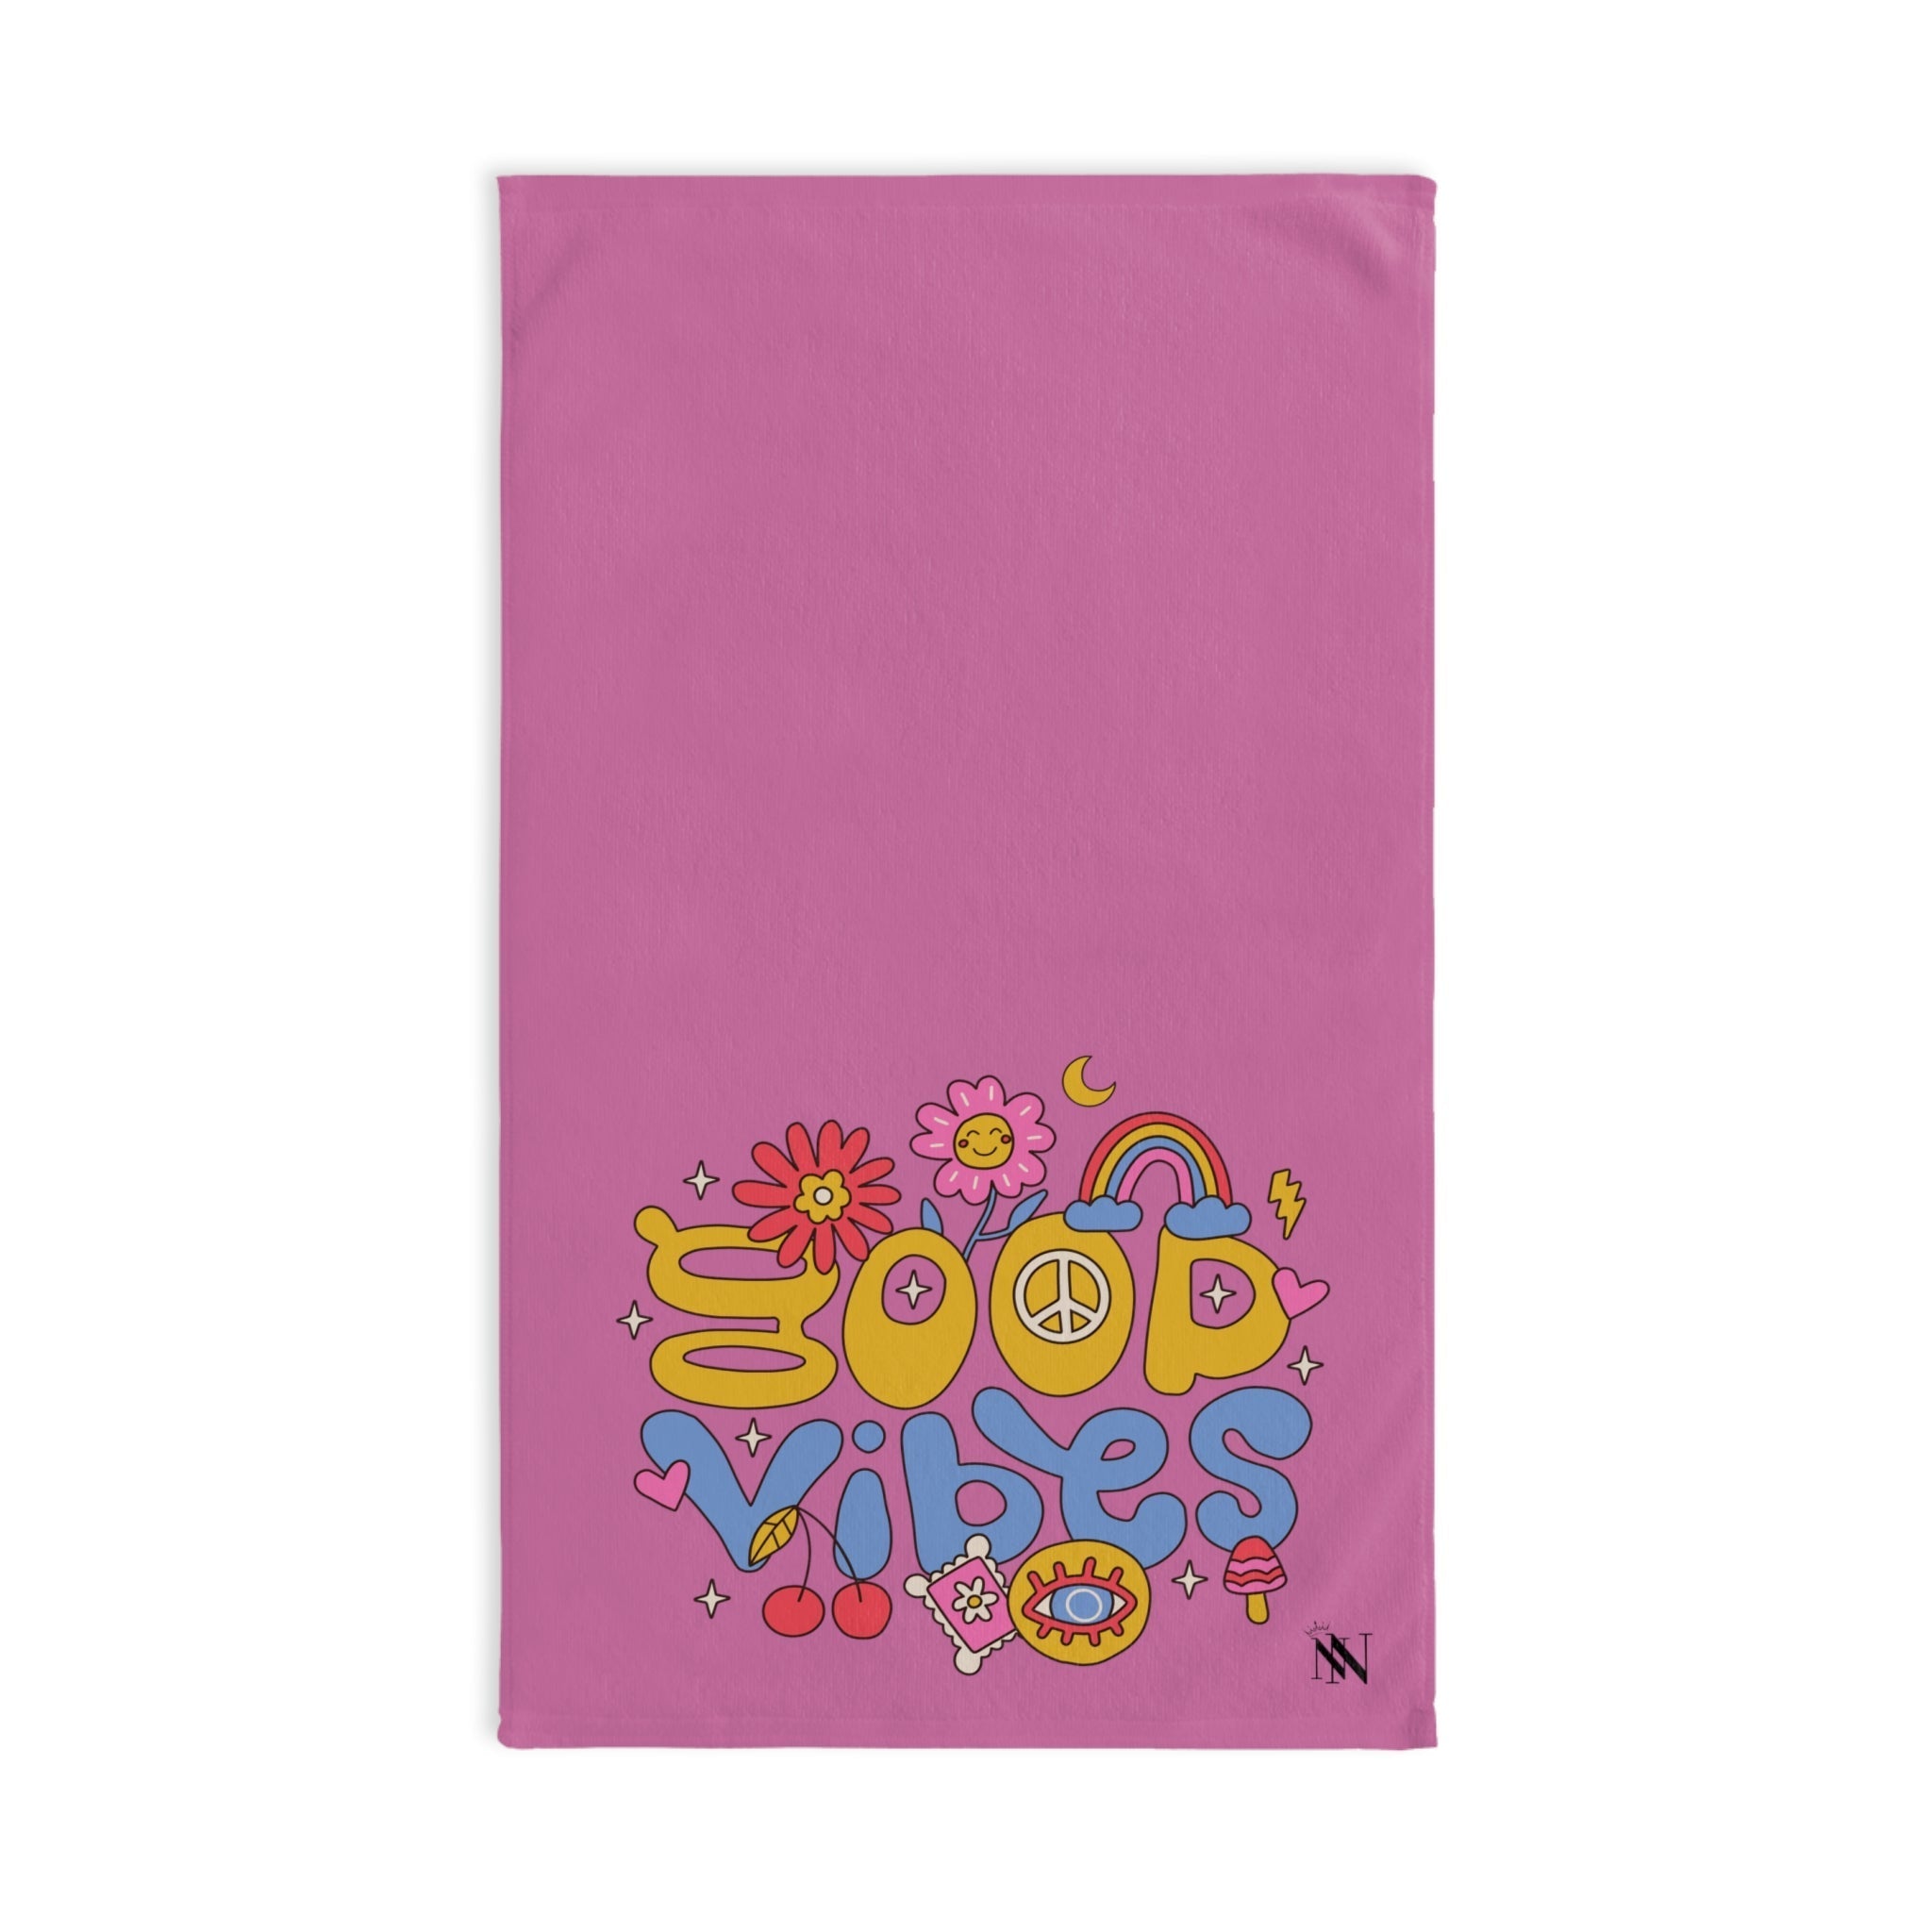 Hippie Vibes Good Pink | Novelty Gifts for Boyfriend, Funny Towel Romantic Gift for Wedding Couple Fiance First Year Anniversary Valentines, Party Gag Gifts, Joke Humor Cloth for Husband Men BF NECTAR NAPKINS